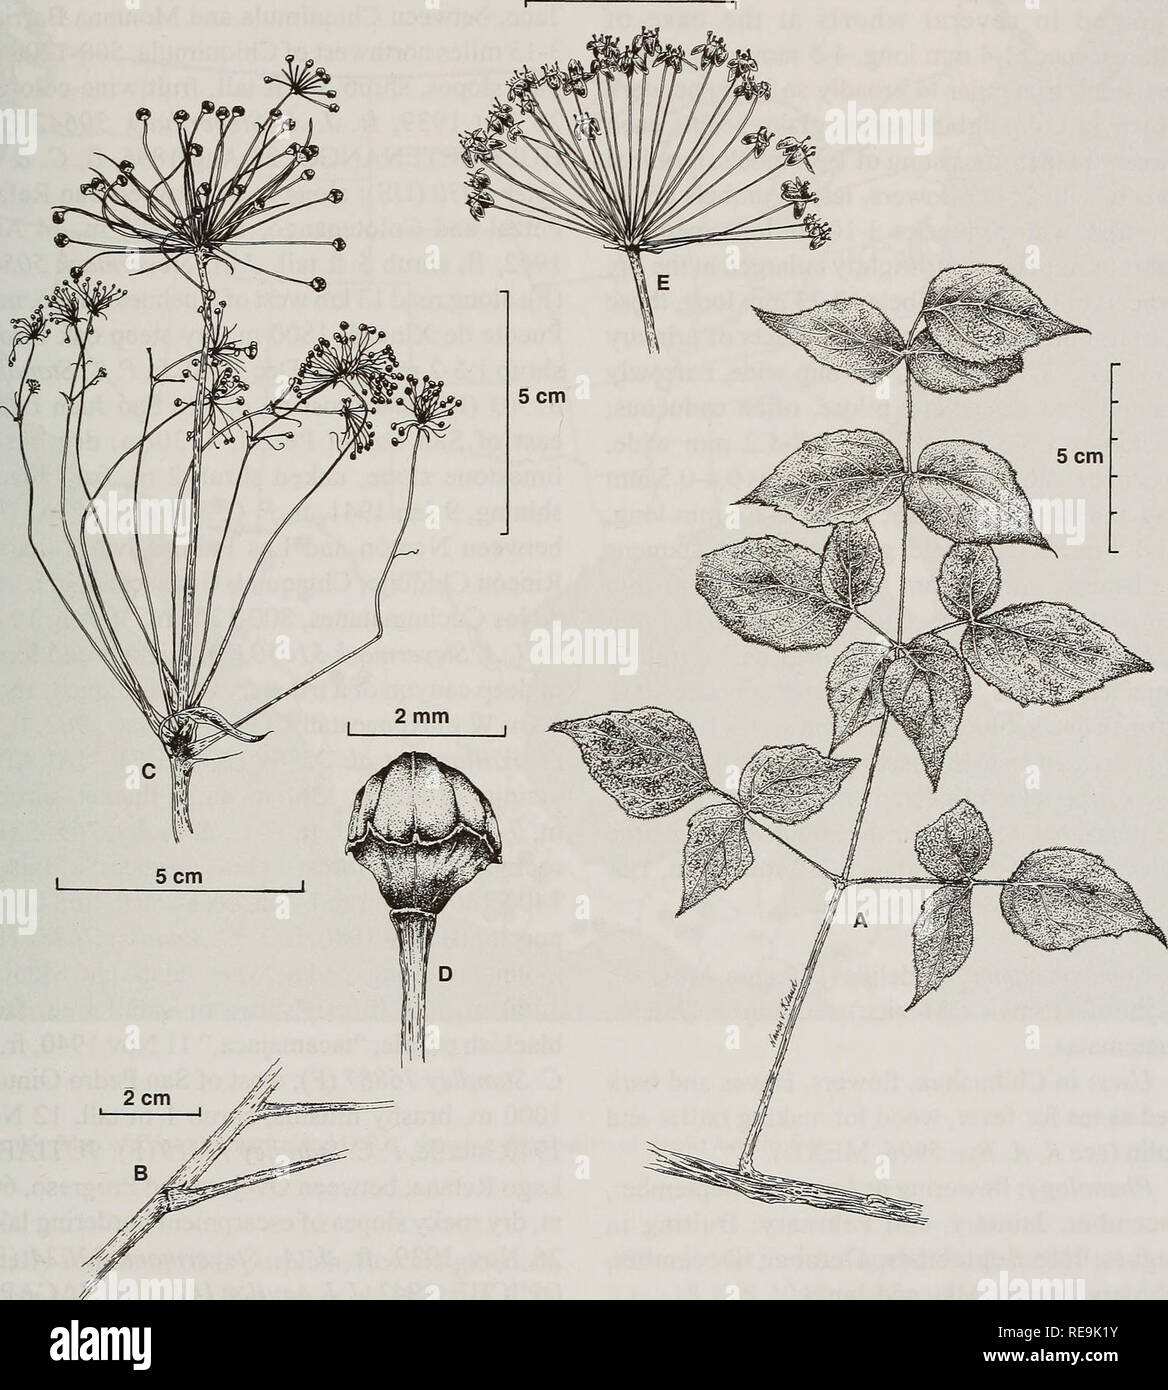 . Contributions from the United States National Herbarium. Botany. Systematics of Aralia 121 2 cm. Fig. 44. Aralia humilis Cav. A. Stem with a bipinnate leaf. B. Stem and lower part of petiole showing stipules. C. Inflorescence. D. Floral buds. E. Umbel with flowers at anthesis. curved white hairs; leaflets 2.8-7.5 cm long, 1.6- 6.5 cm wide, papery, ovate to broadly or narrowly ovate, acute to acuminate at apex, rounded, broadly acute to slightly subcordate at base, symmetrical or sometimes oblique, serrulateto serrate at margin, tip of teeth glandular, lateral veins 5-6, conspicuous above and Stock Photo